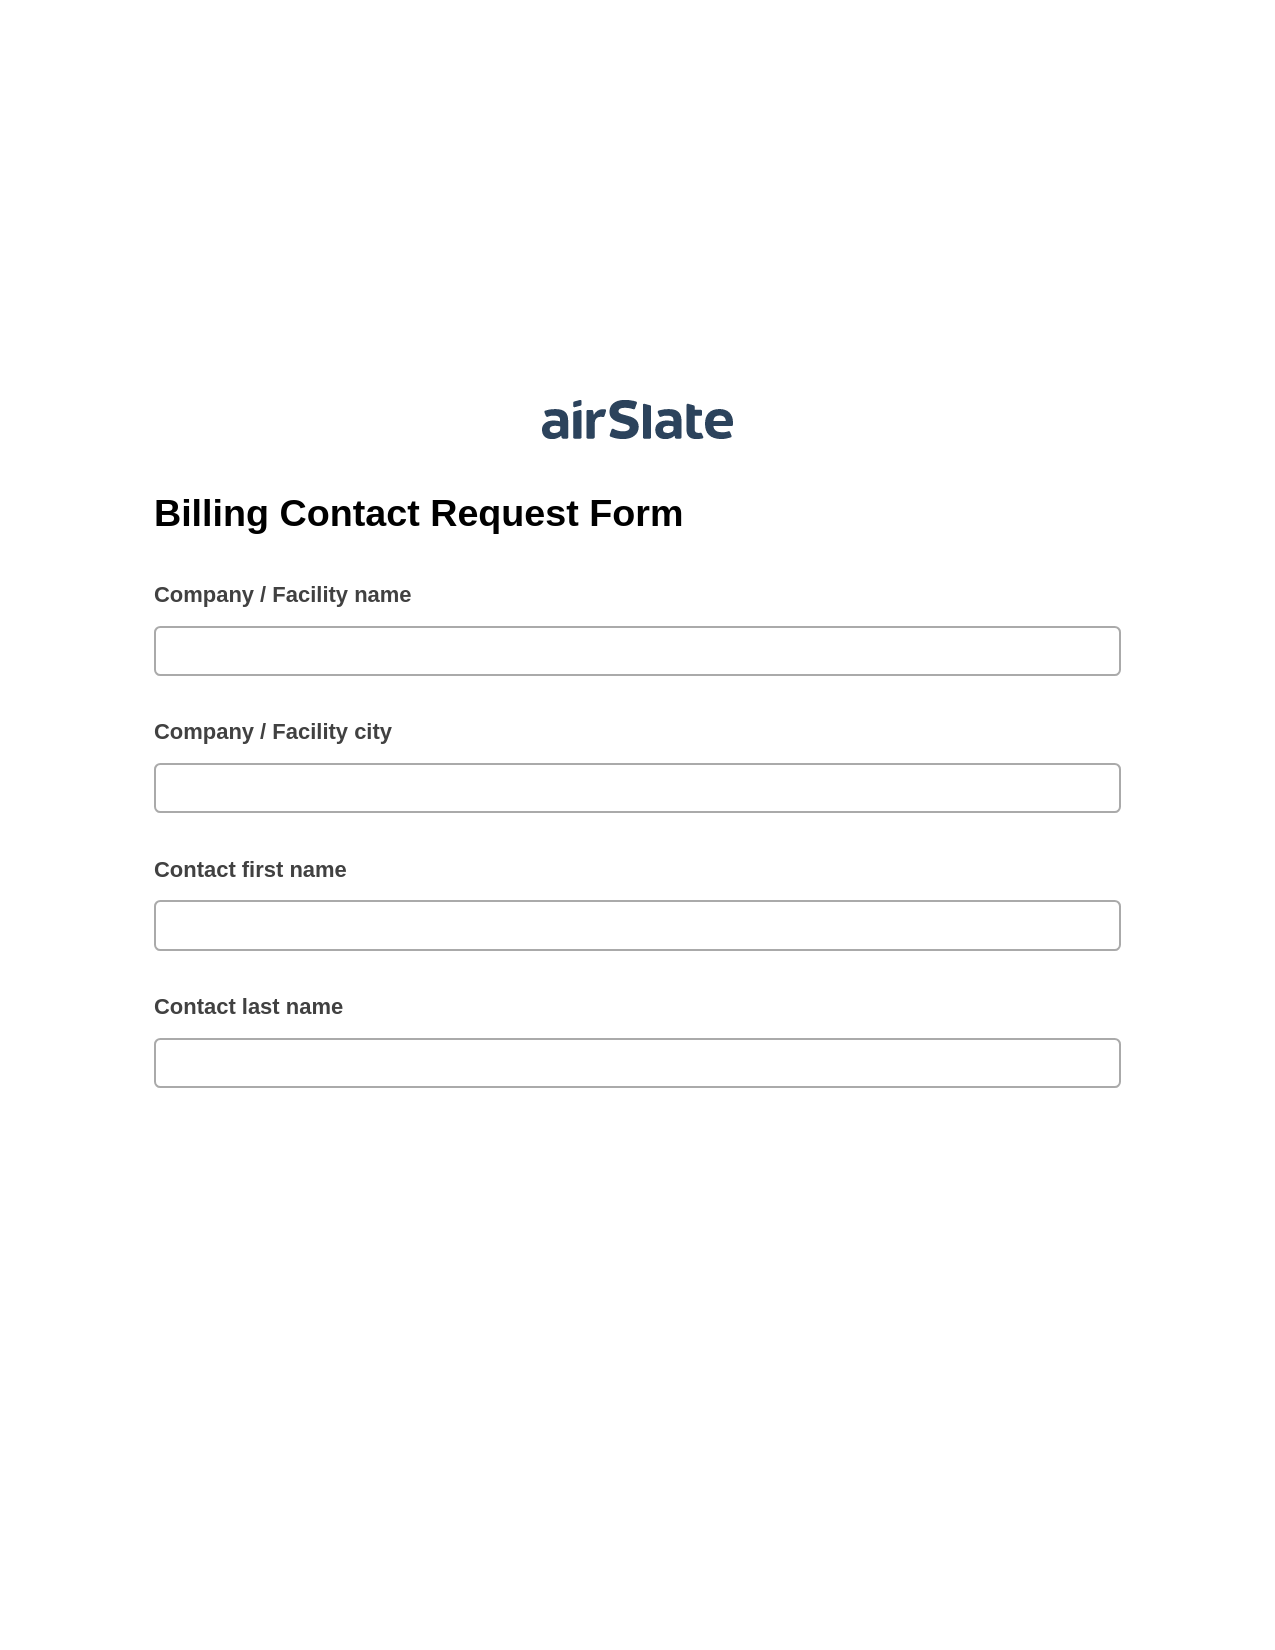 Billing Contact Request Form Pre-fill from Salesforce Record Bot, Reminder Bot, Export to Formstack Documents Bot